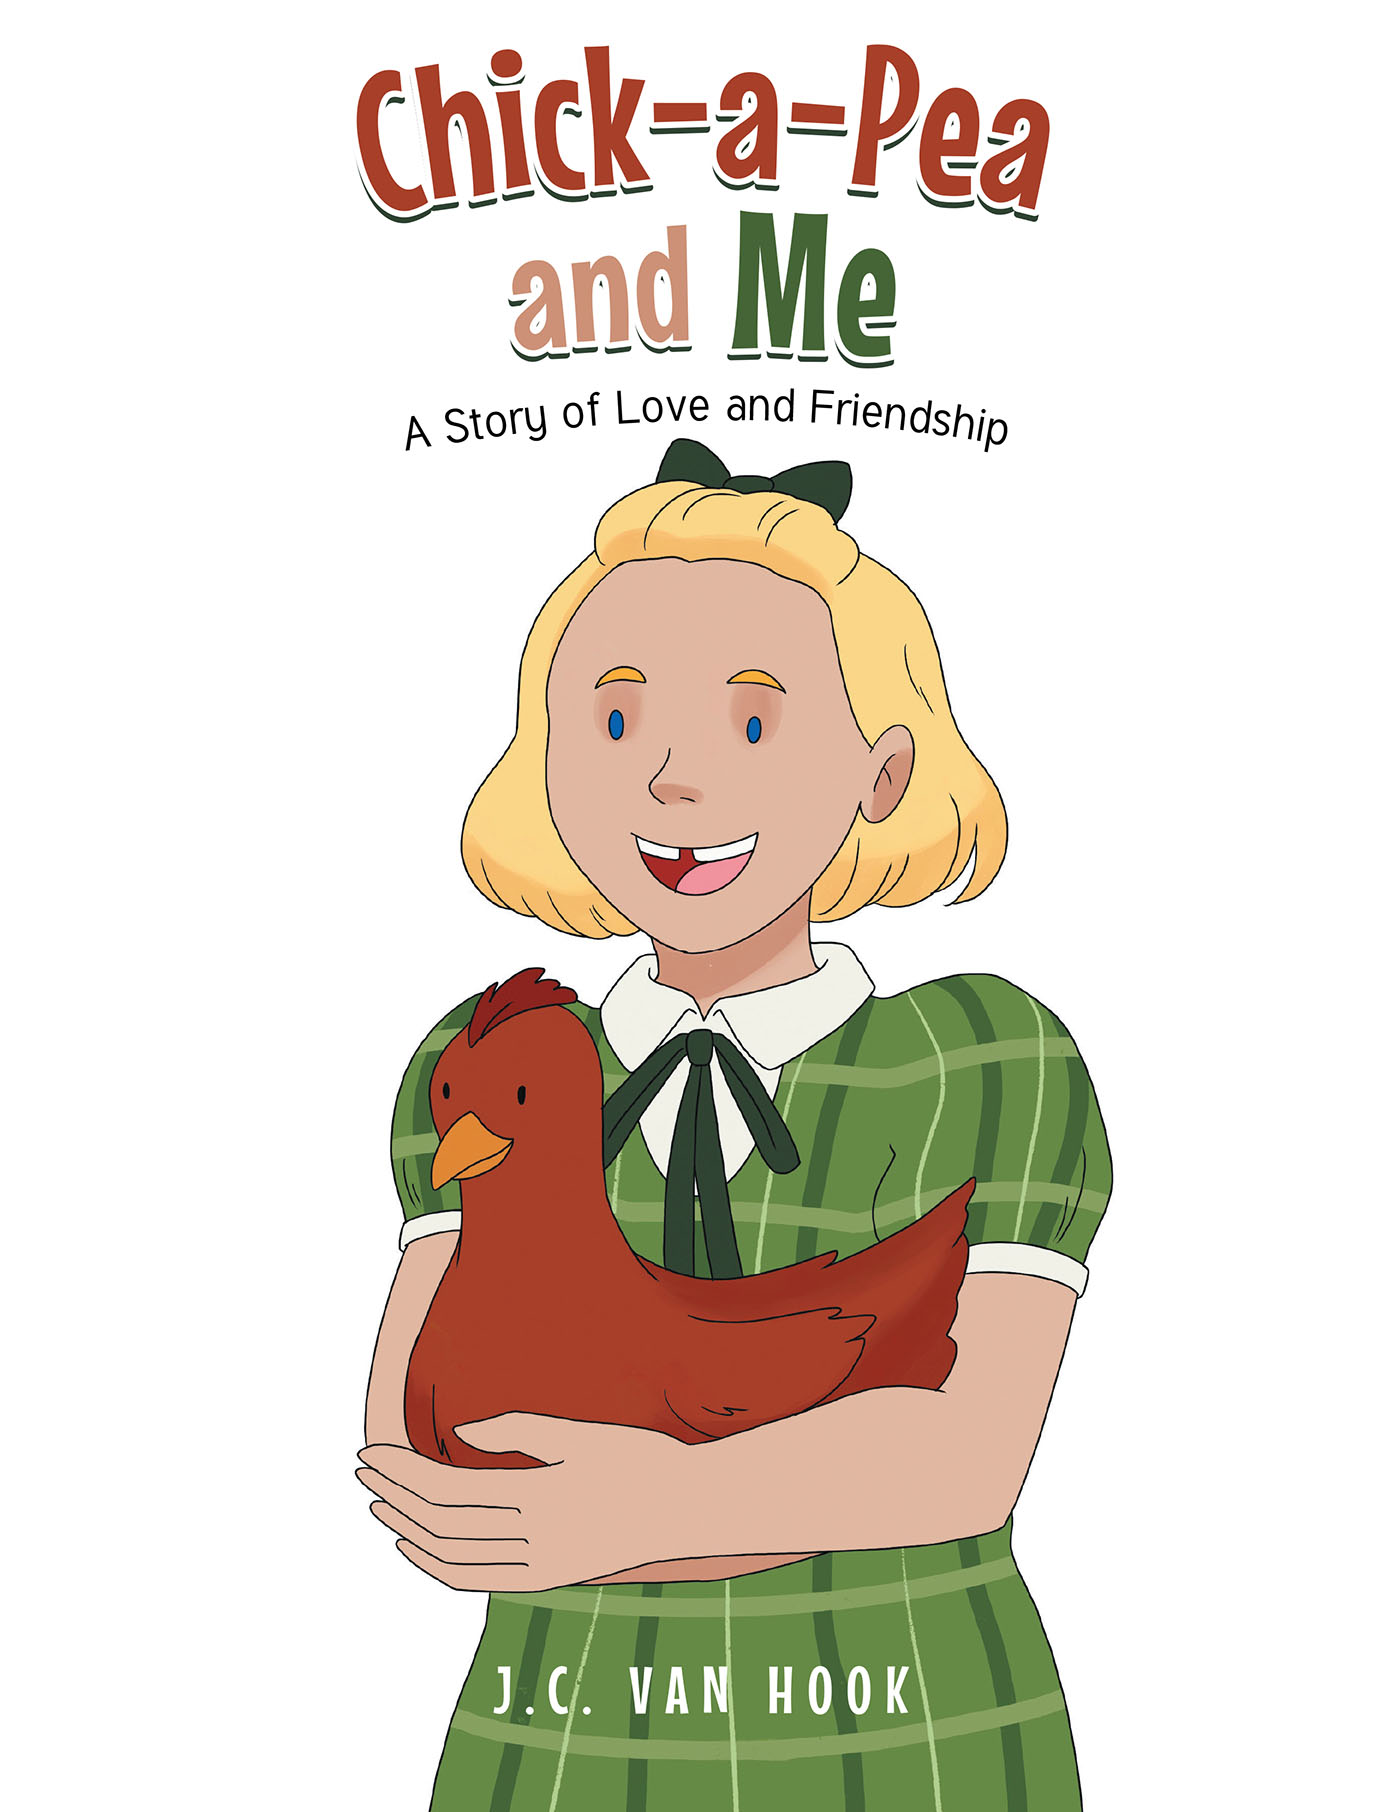 Author J.C. Van Hook’s New Book, “Chick-A-Pea and Me,” is an Adorable Story of the Lifelong Friendship Between a Young Girl and Her Beloved Pet Chicken